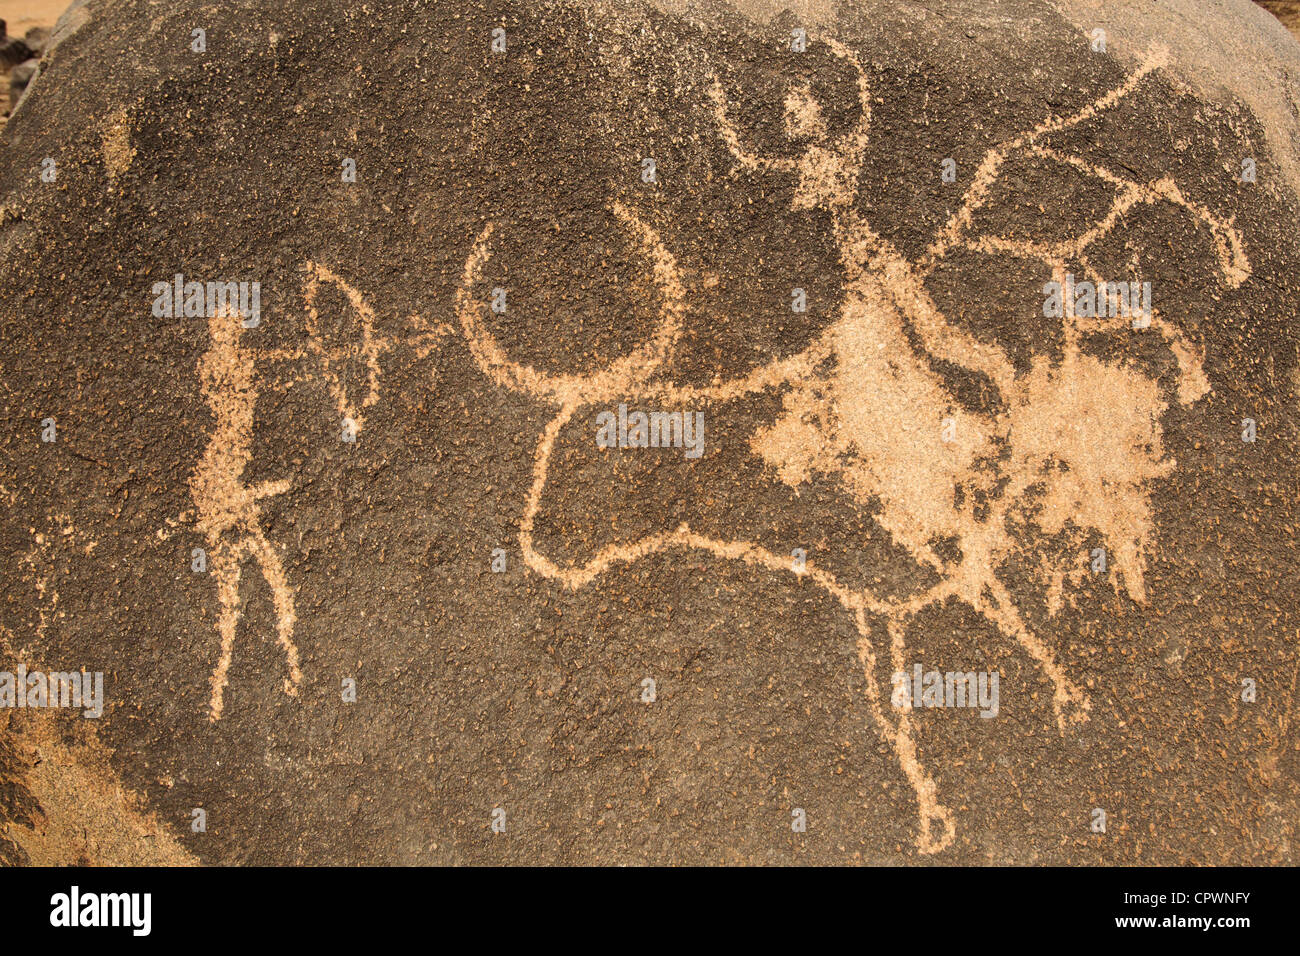 Imitation of an ancient cave drawing on a stone at the Loango granite sanctuary near the town of Ziniare, Burkina Faso, West Afr Stock Photo